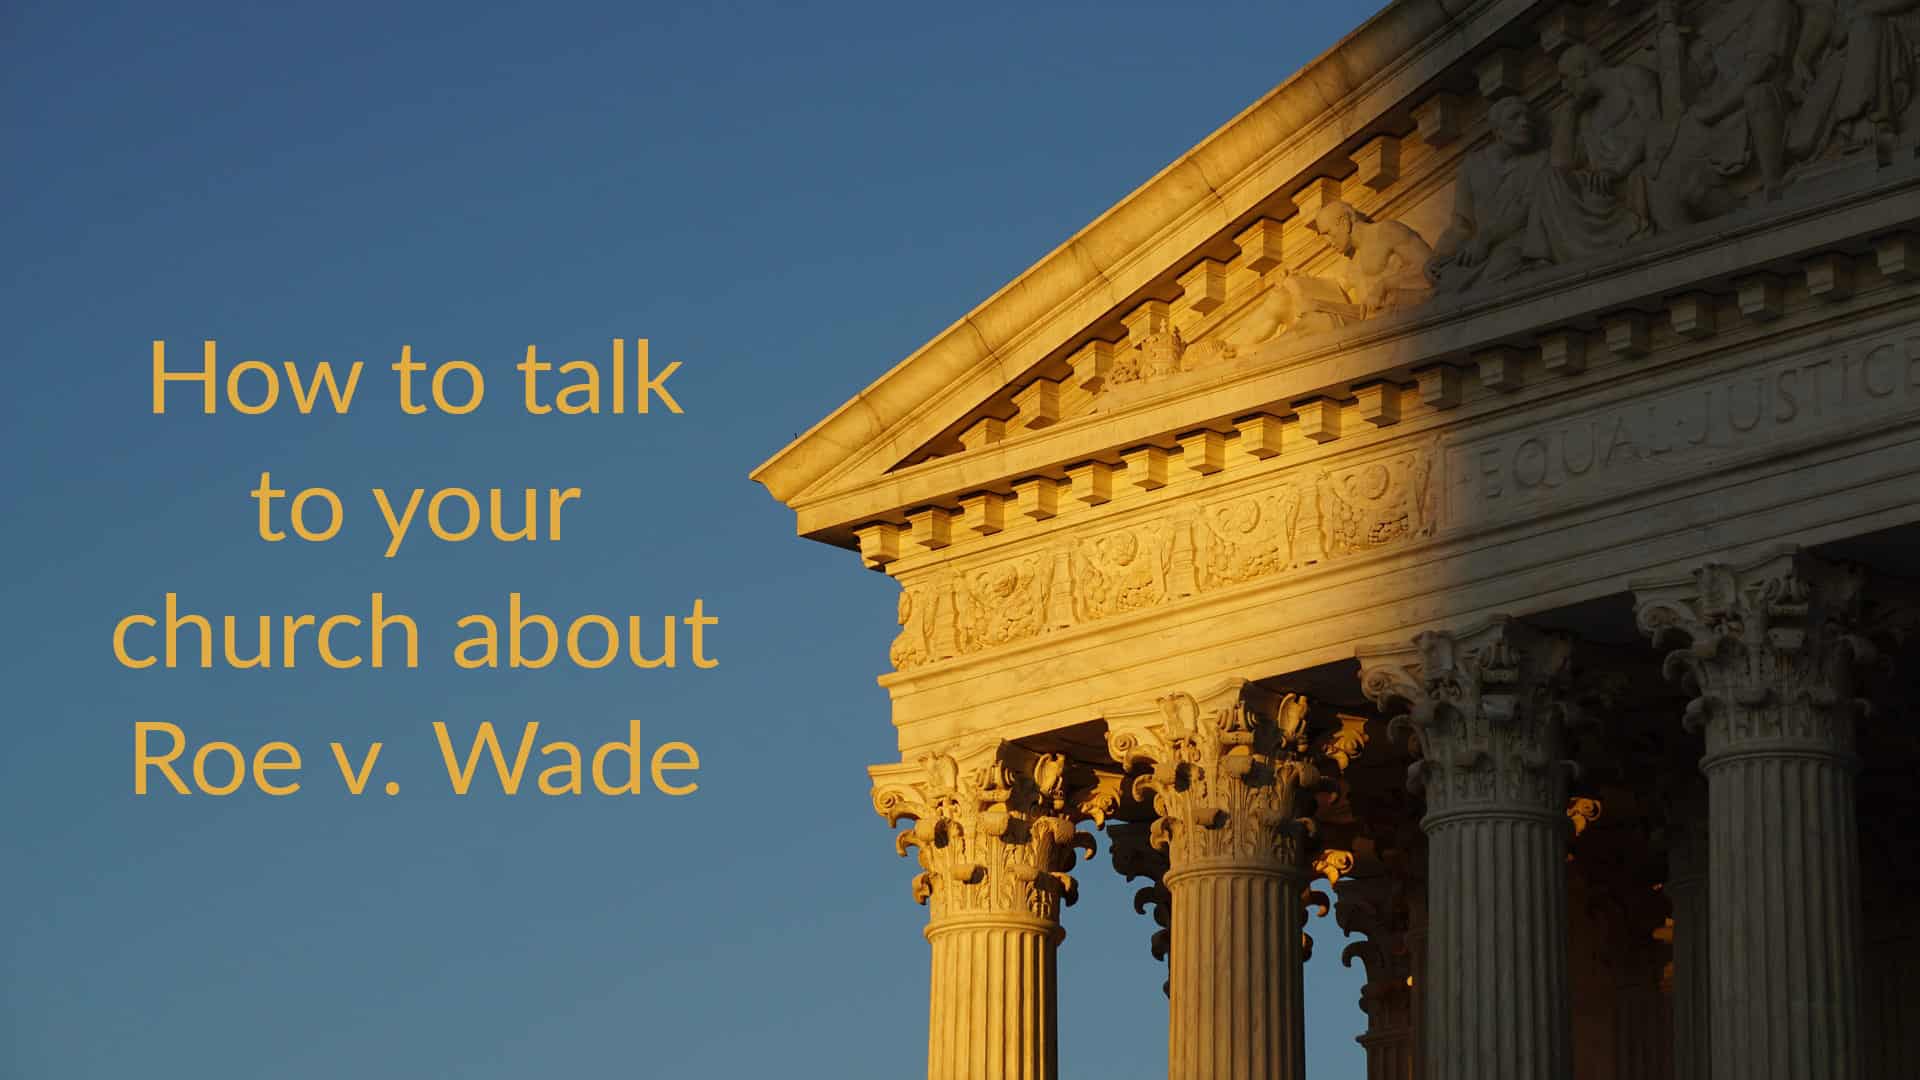 How to talk to your church about Roe v. Wade